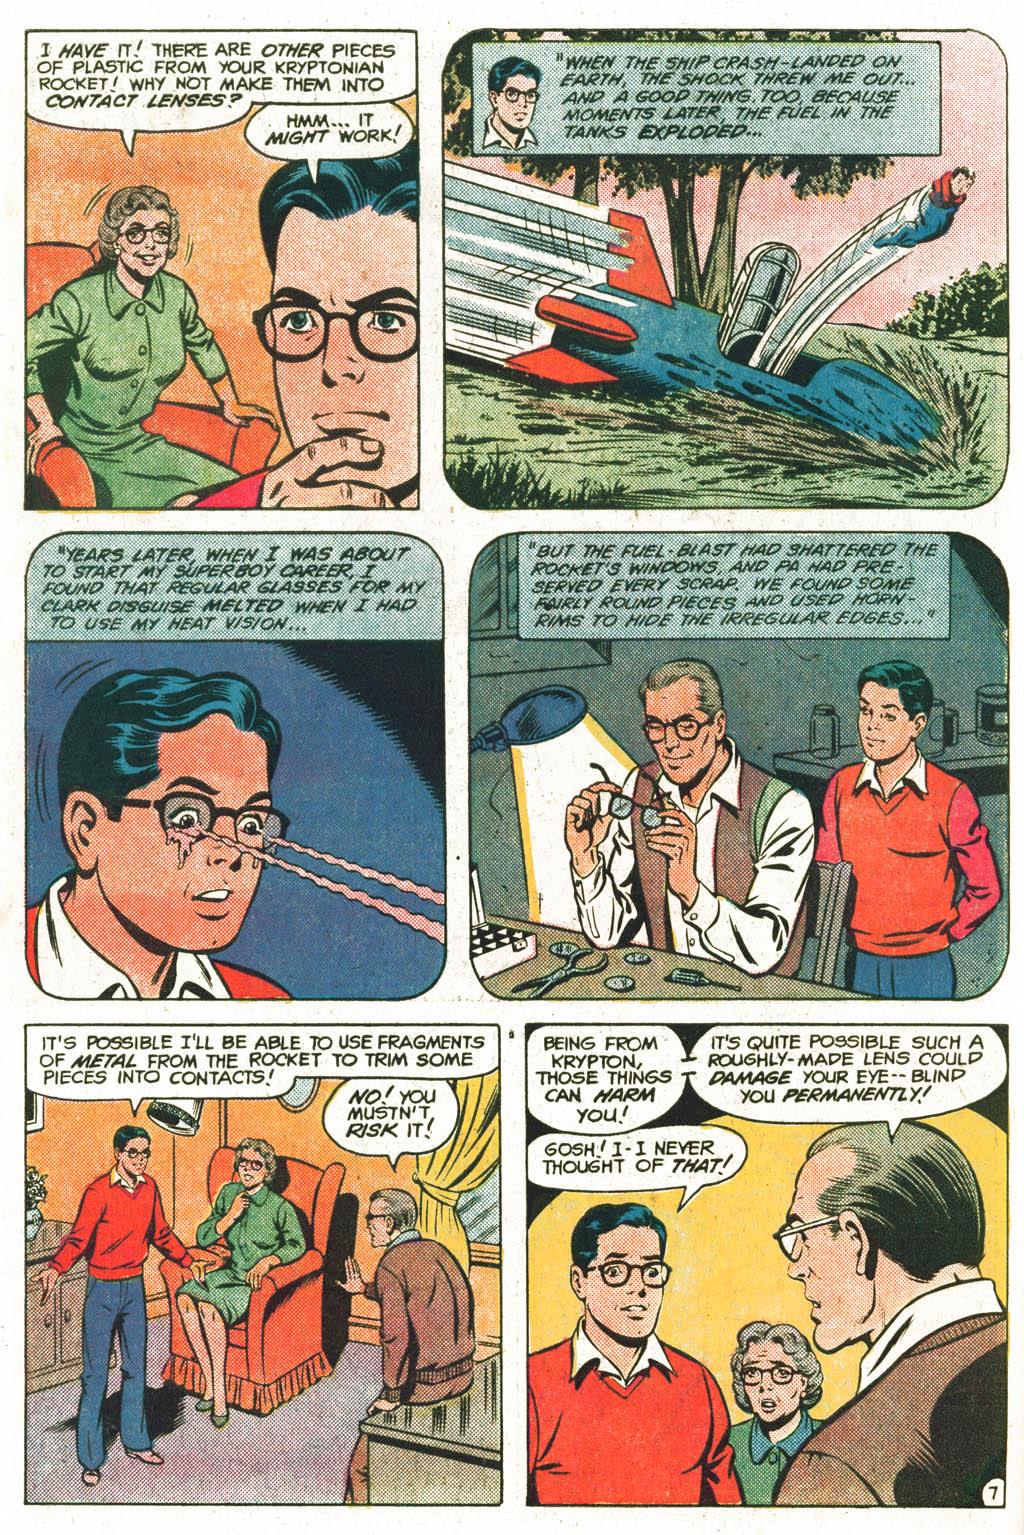 The New Adventures of Superboy 24 Page 7